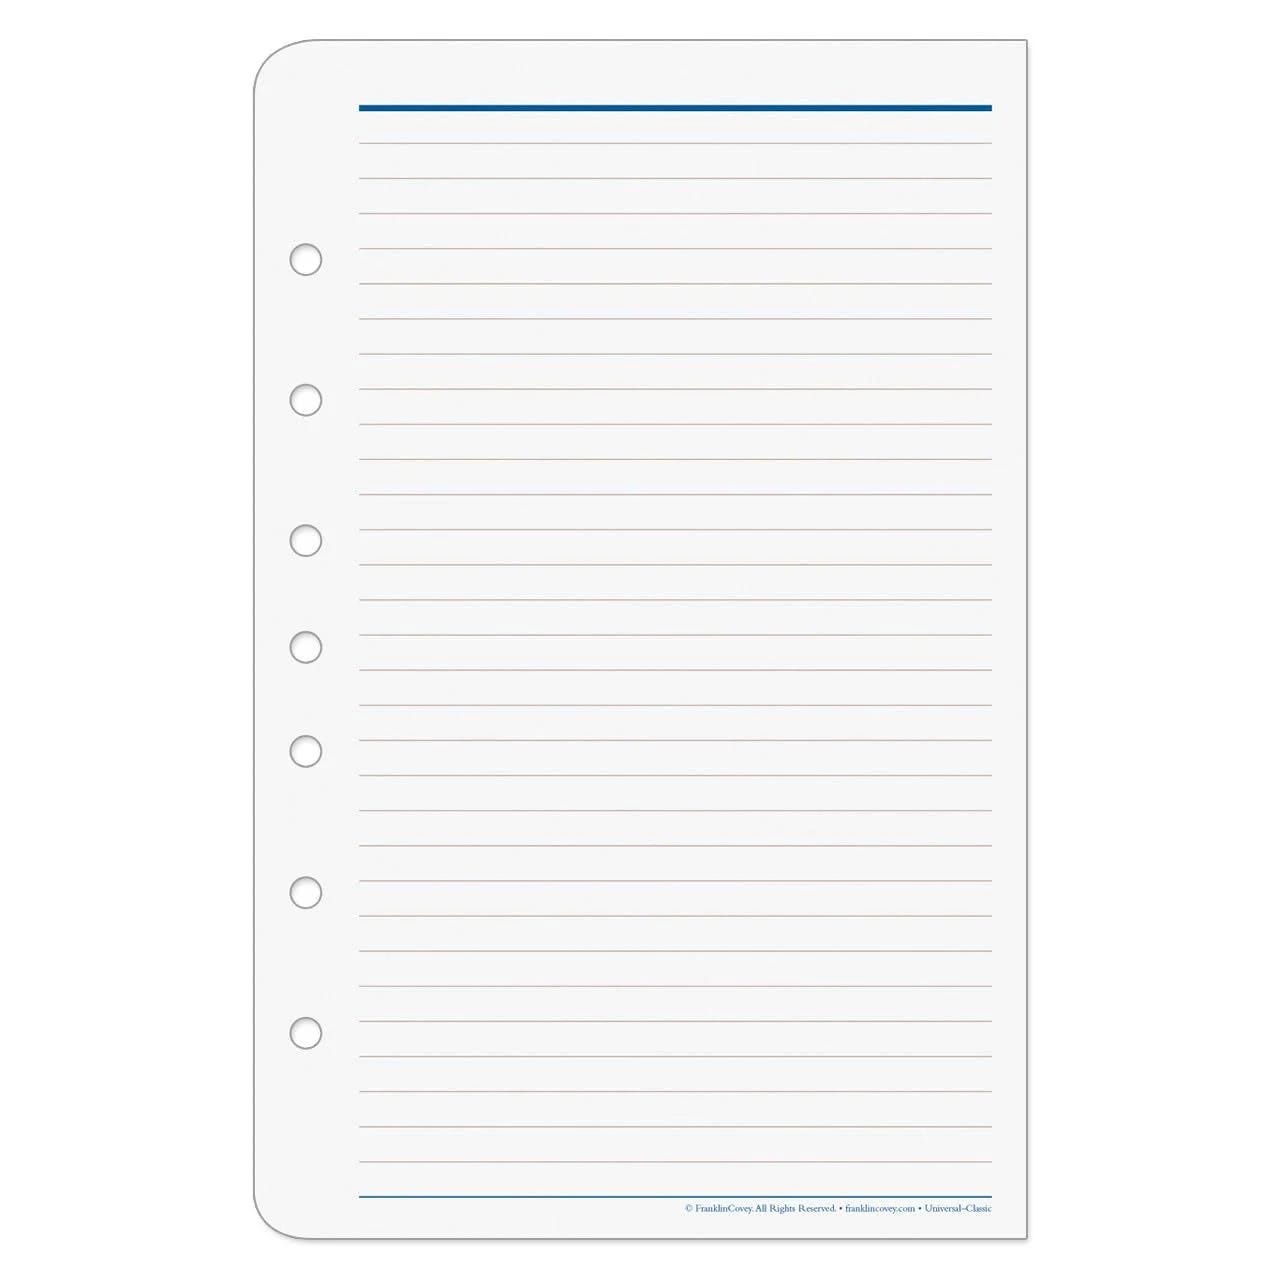 Classic Wide Lined Pages for Organized Writing | Image